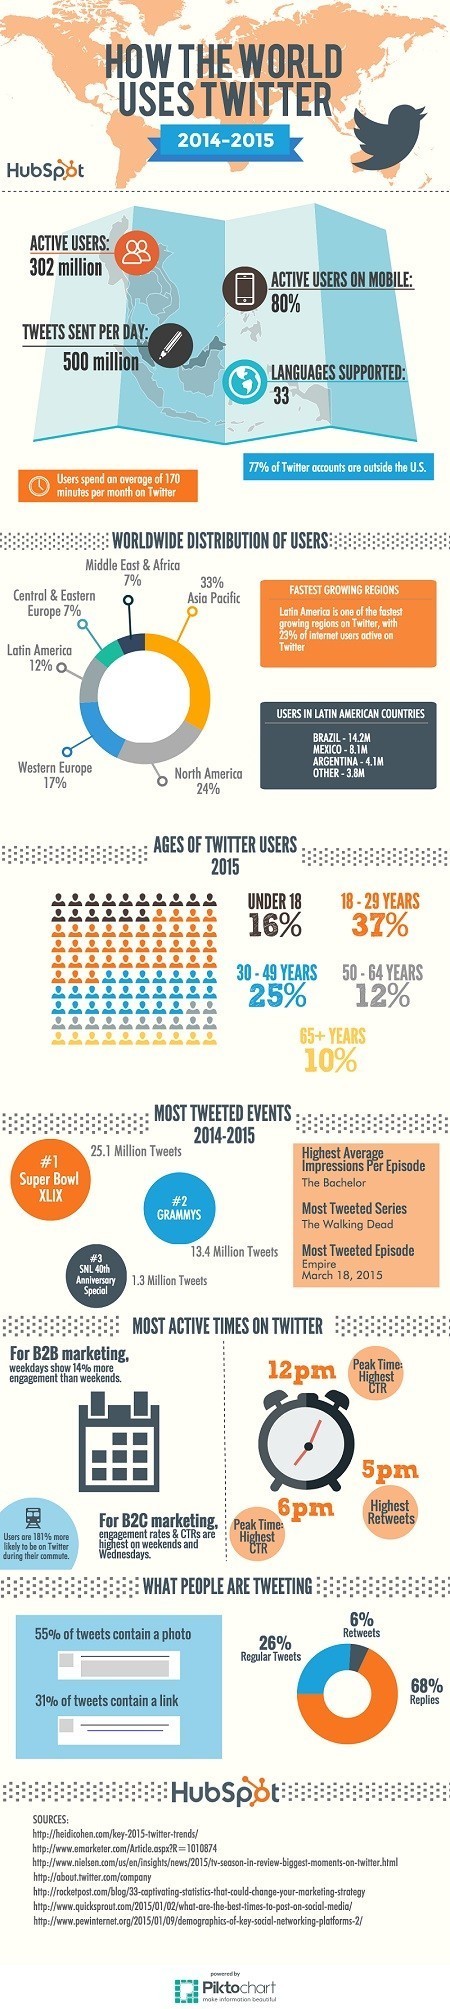 How the World Uses Twitter [Infographic] | Design, Science and Technology | Scoop.it